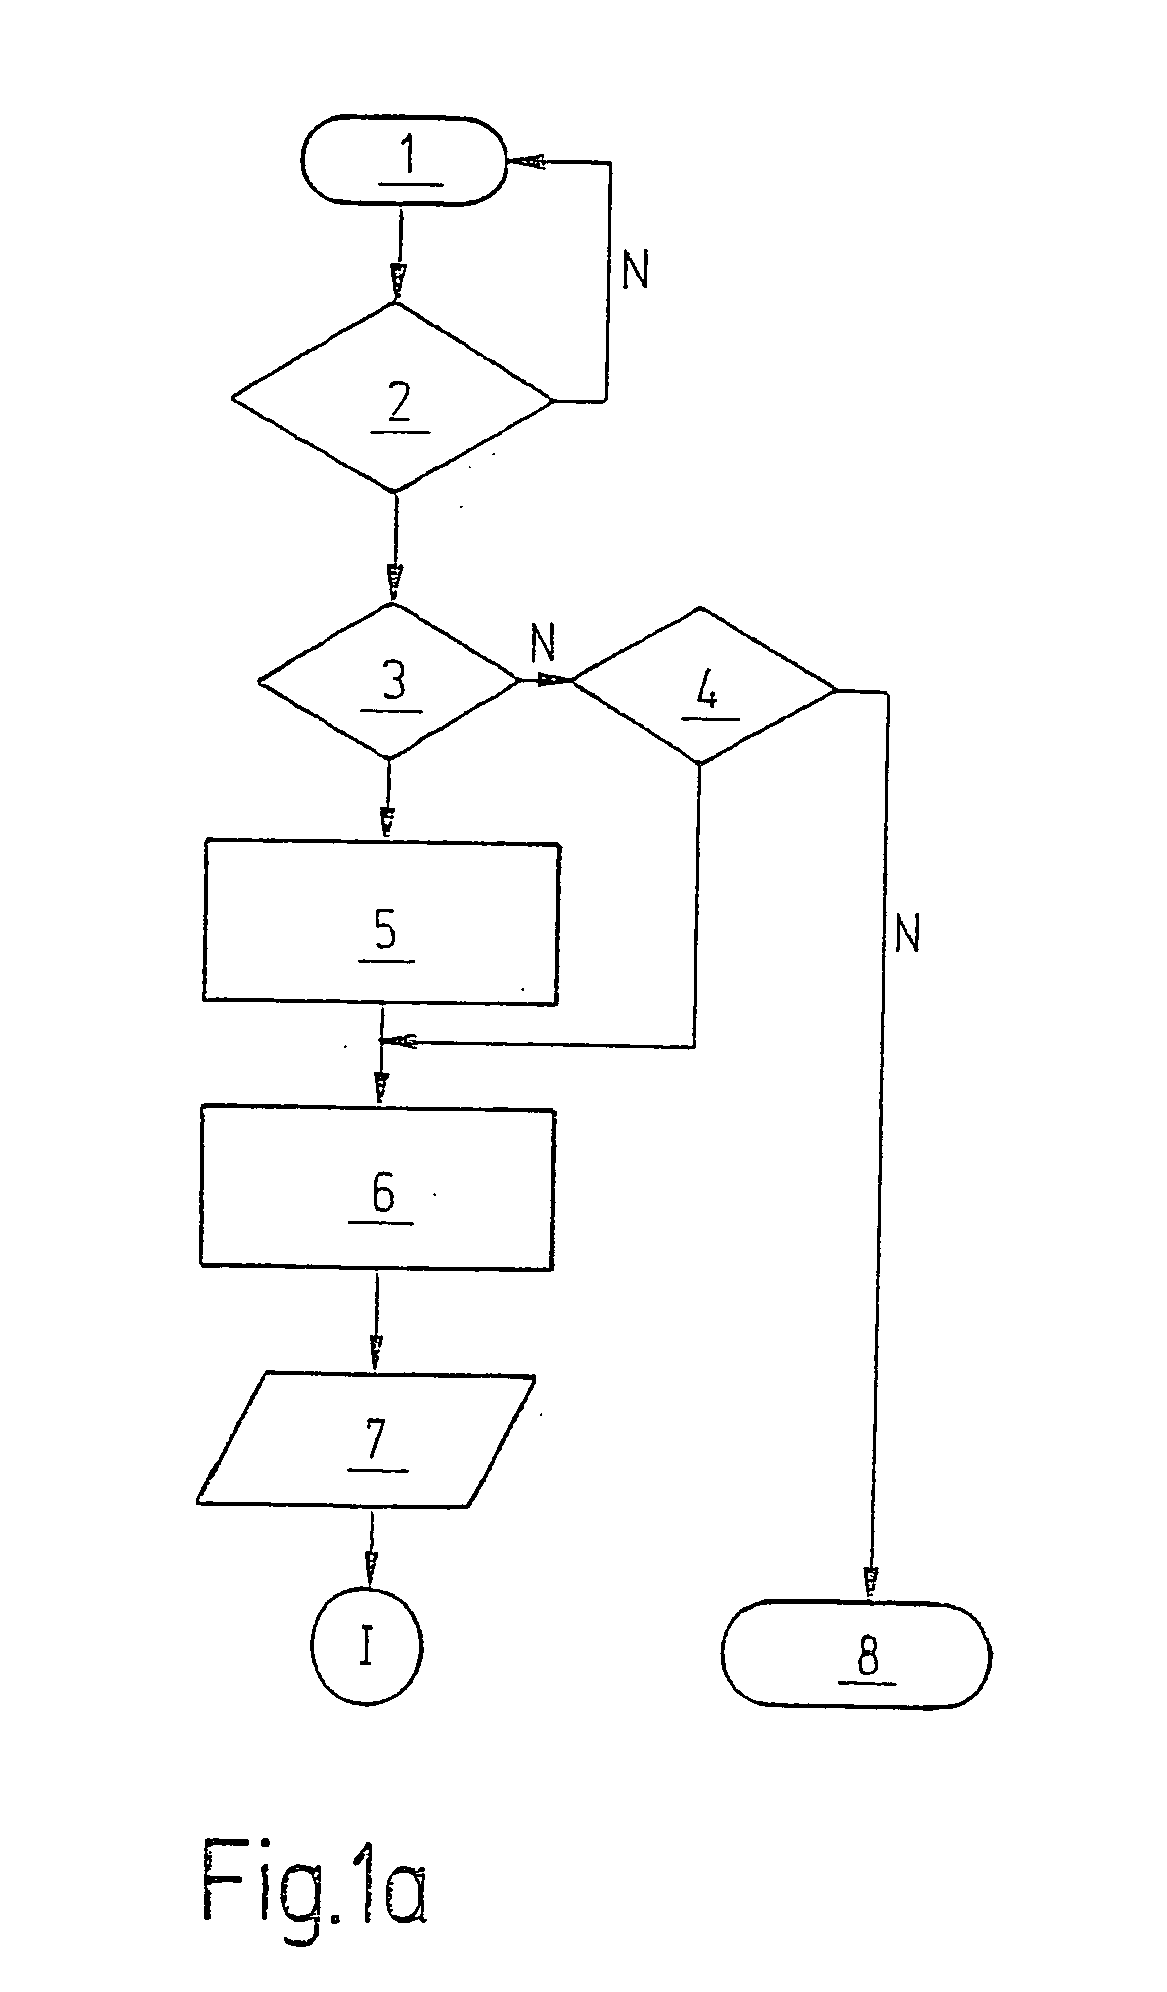 Updating routing and traffic flow data and vehicle navigation device